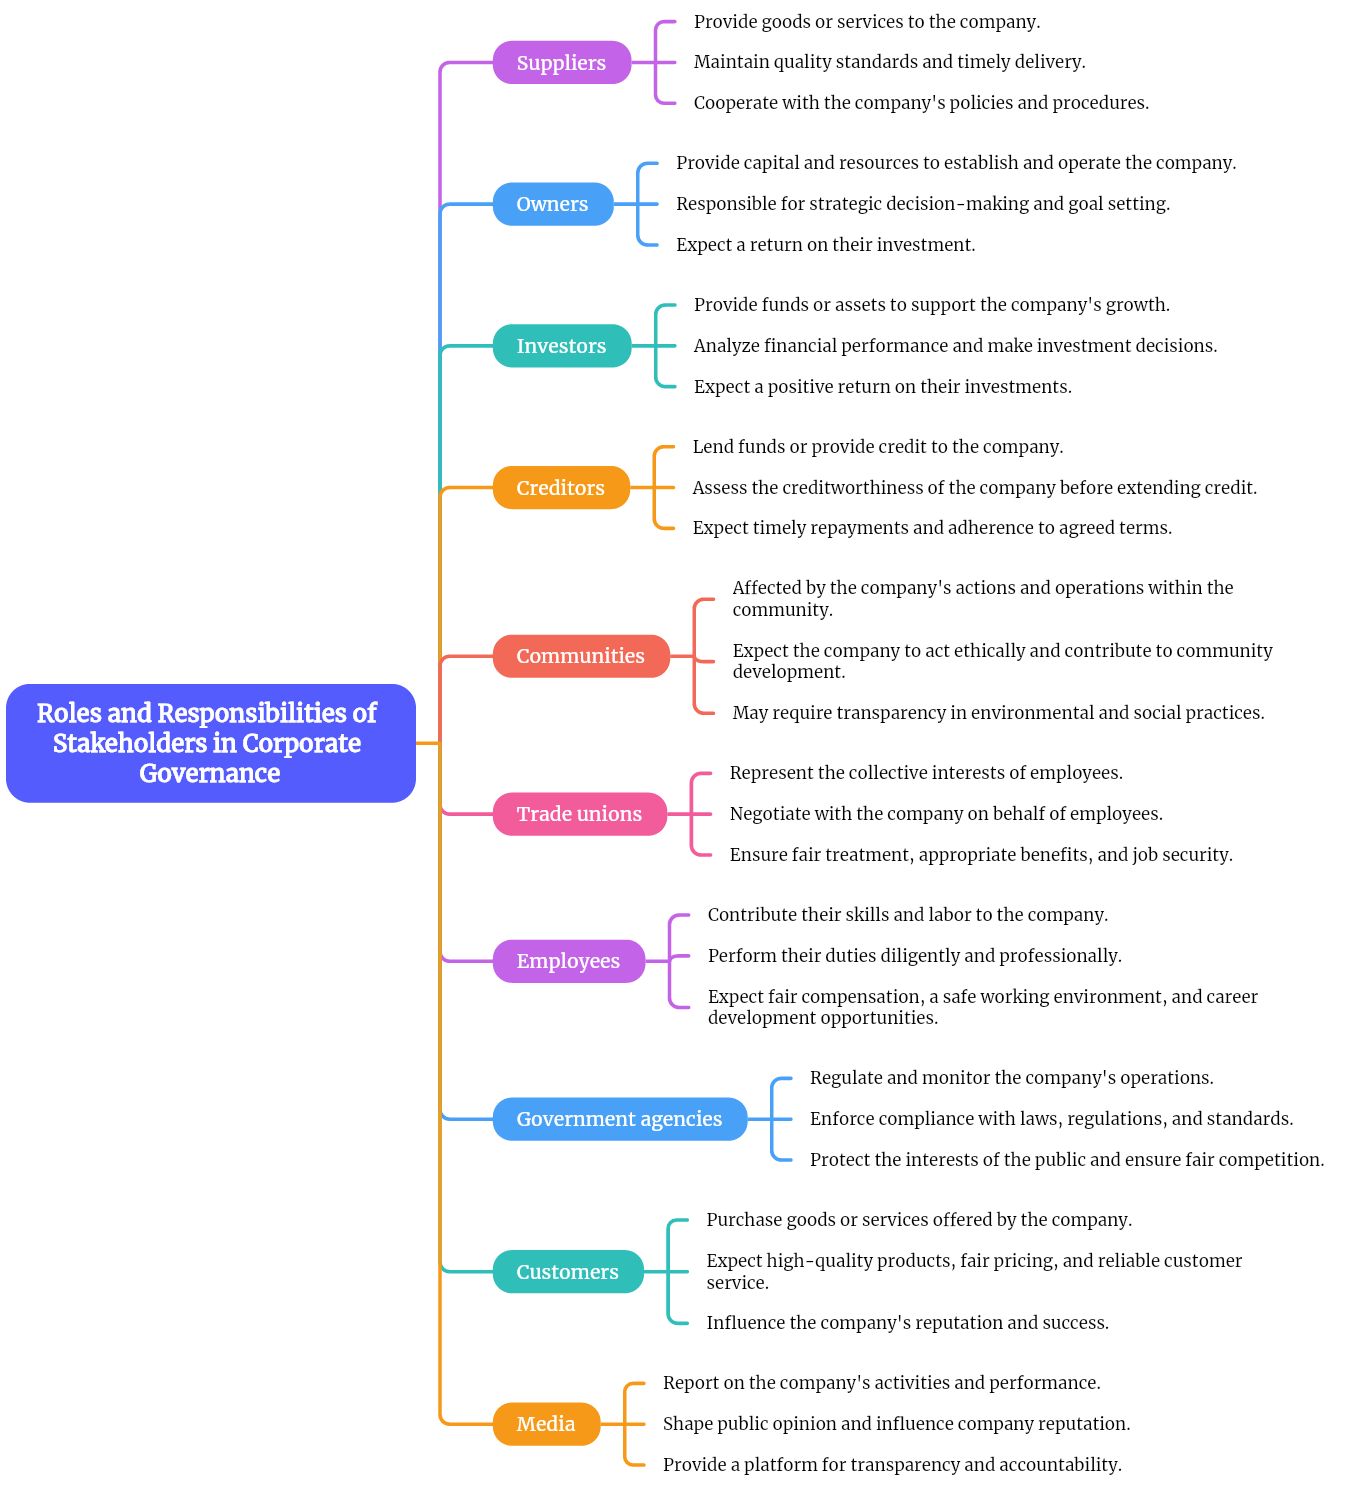 Roles and Responsibilities of Stakeholders Mind Map